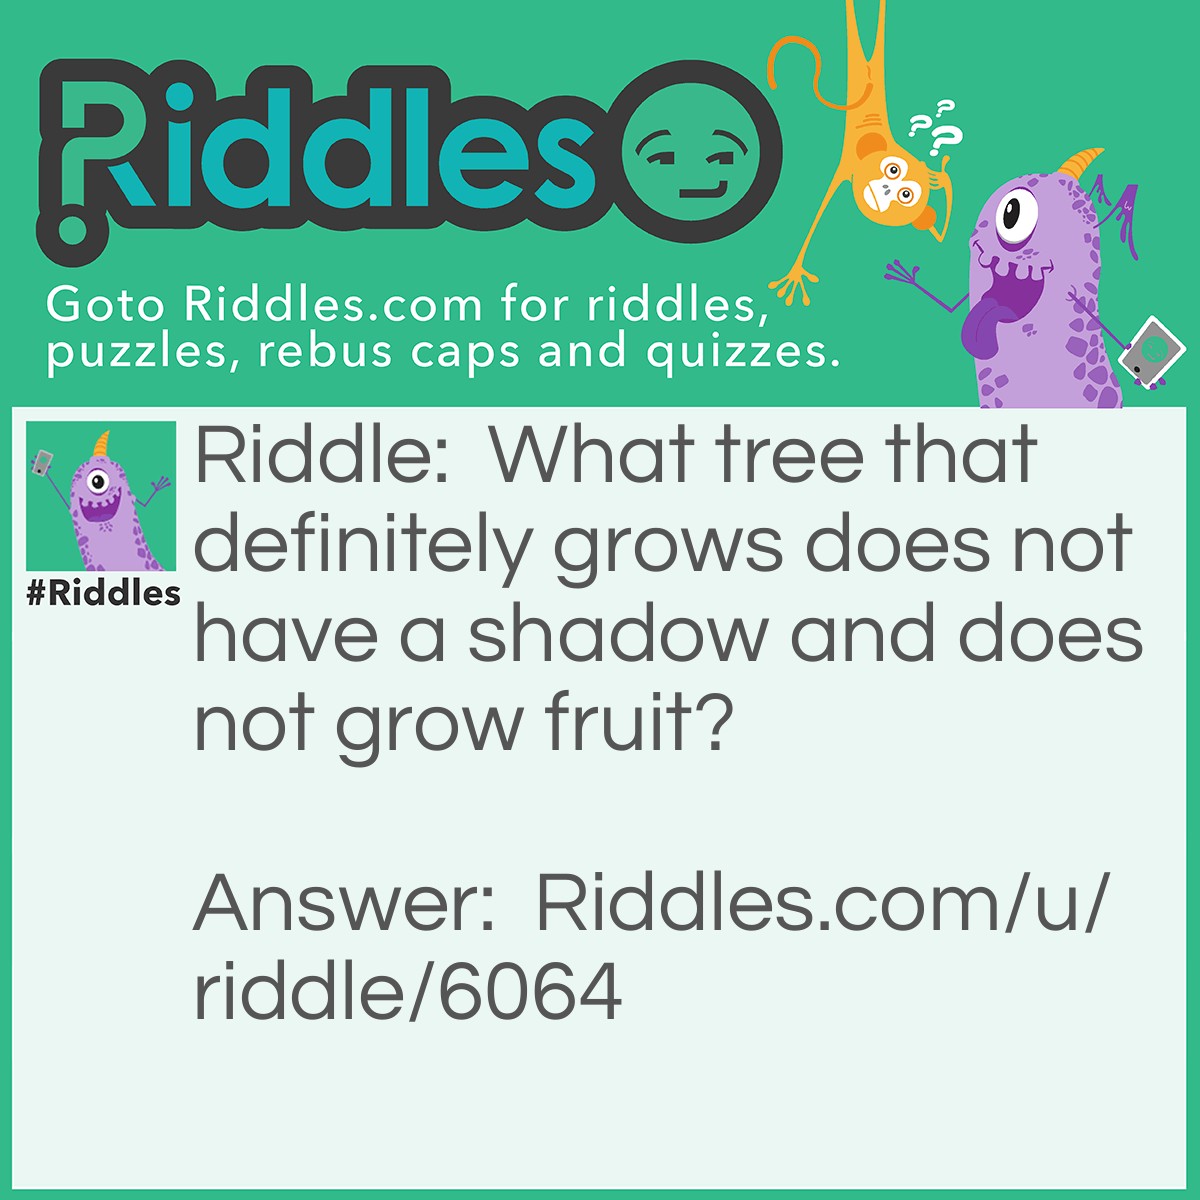 Riddle: What tree that definitely grows does not have a shadow and does not grow fruit? Answer: The FAMILY TREE !!